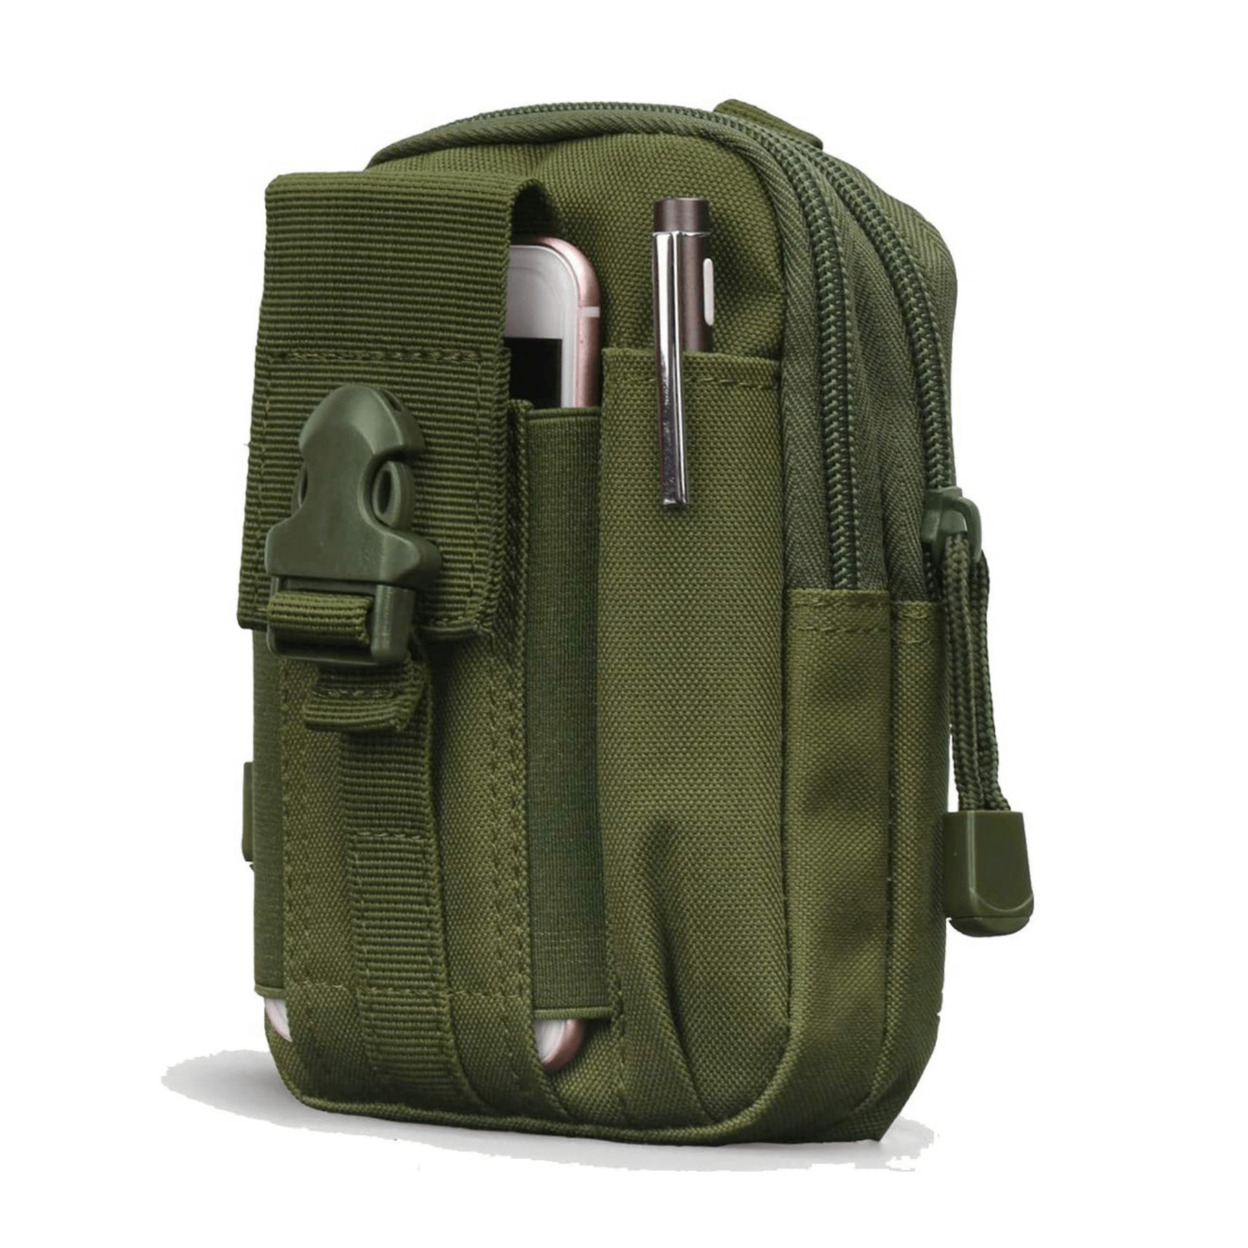 Tactical MOLLE Pouch & Waist Bag For Hiking & Outdoor Activities - Khaki